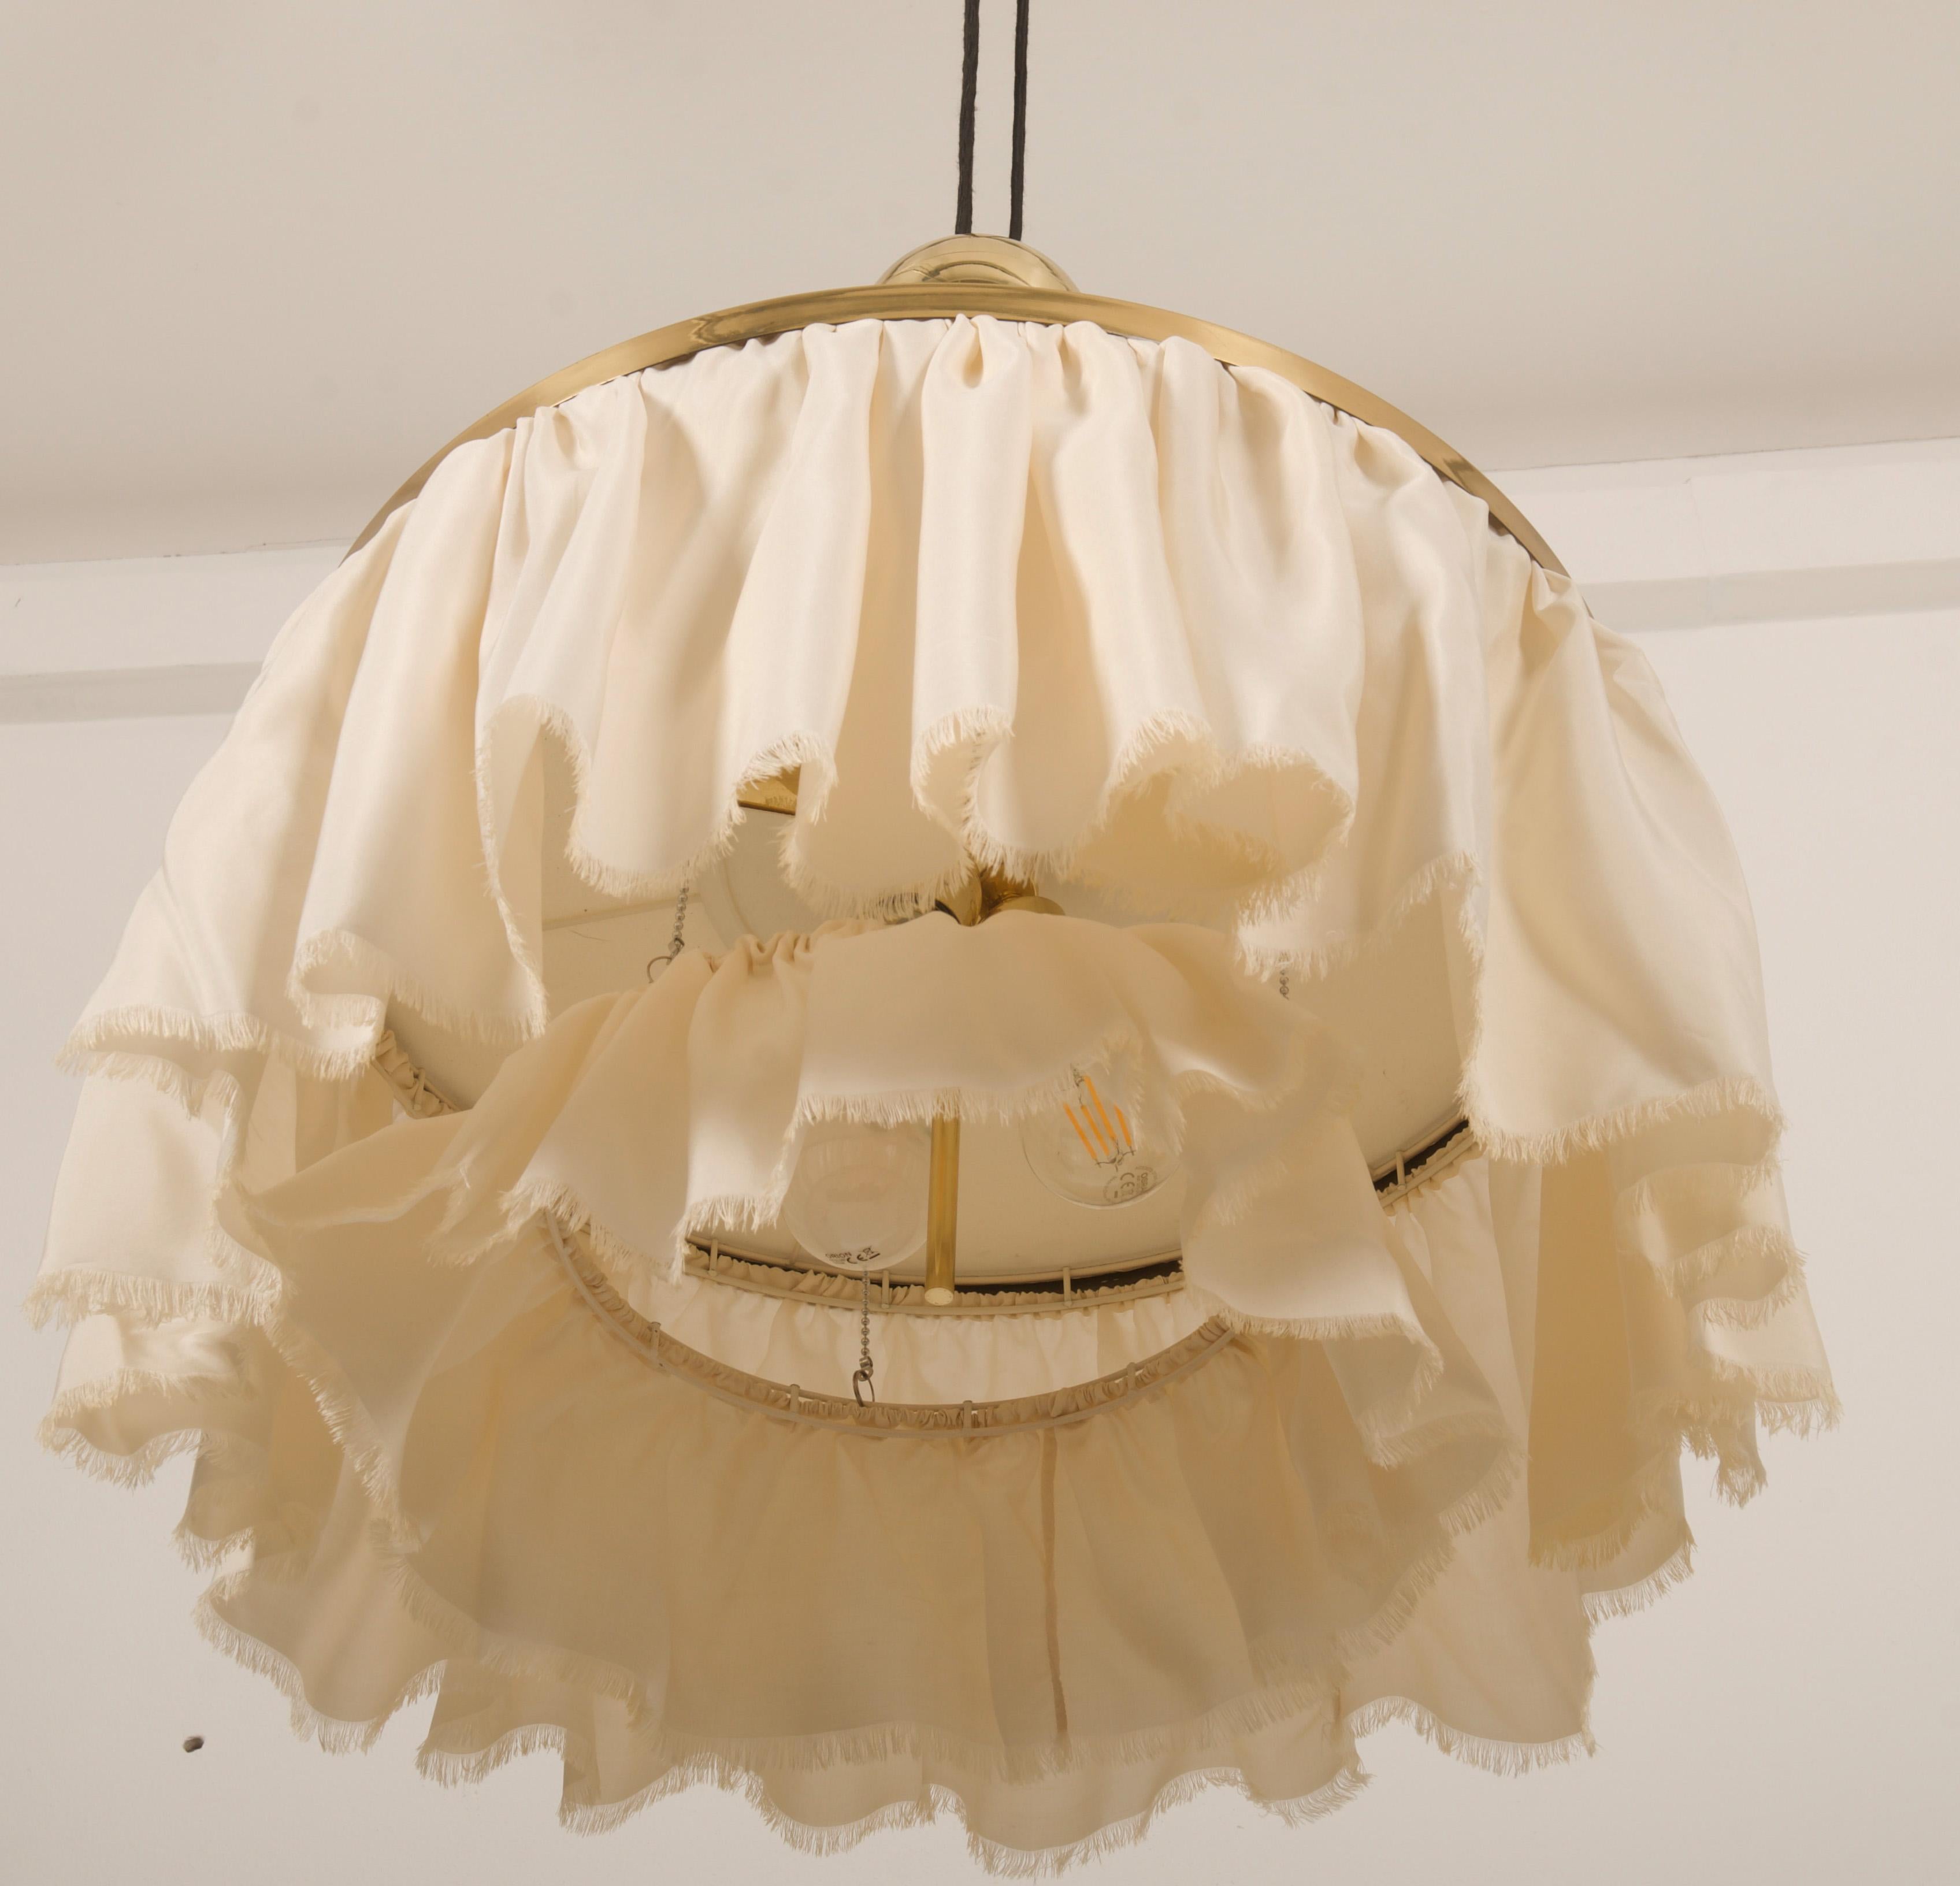 Counterweight Silk Pendant Light by J.T. Kalmar Designed by Adolf Loos In Good Condition For Sale In Vienna, AT